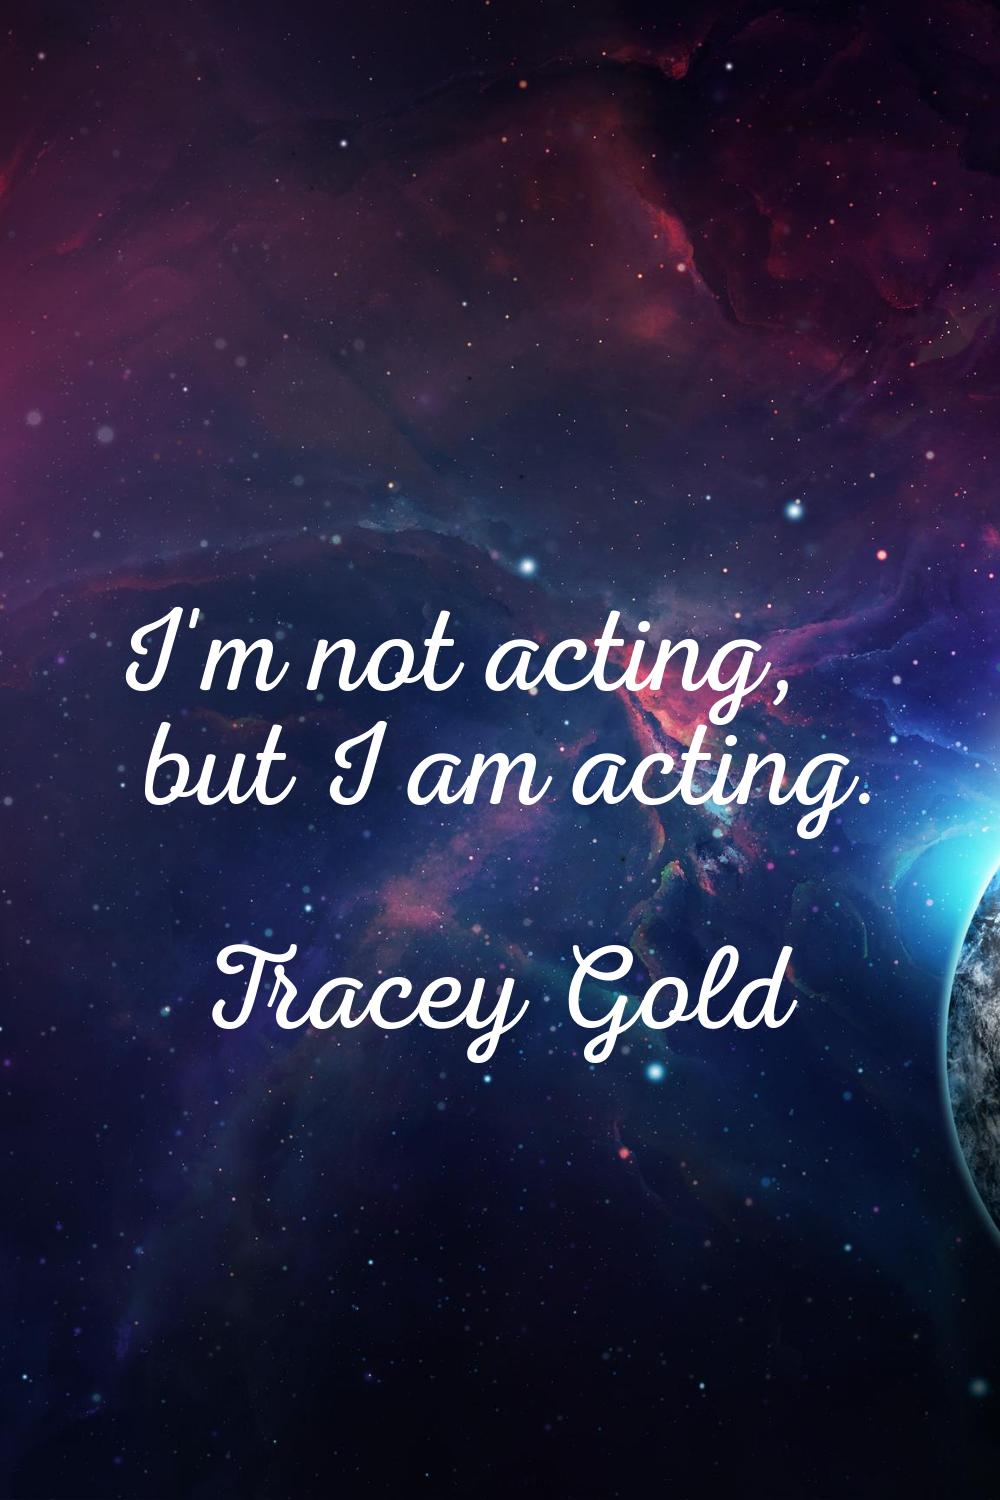 I'm not acting, but I am acting.